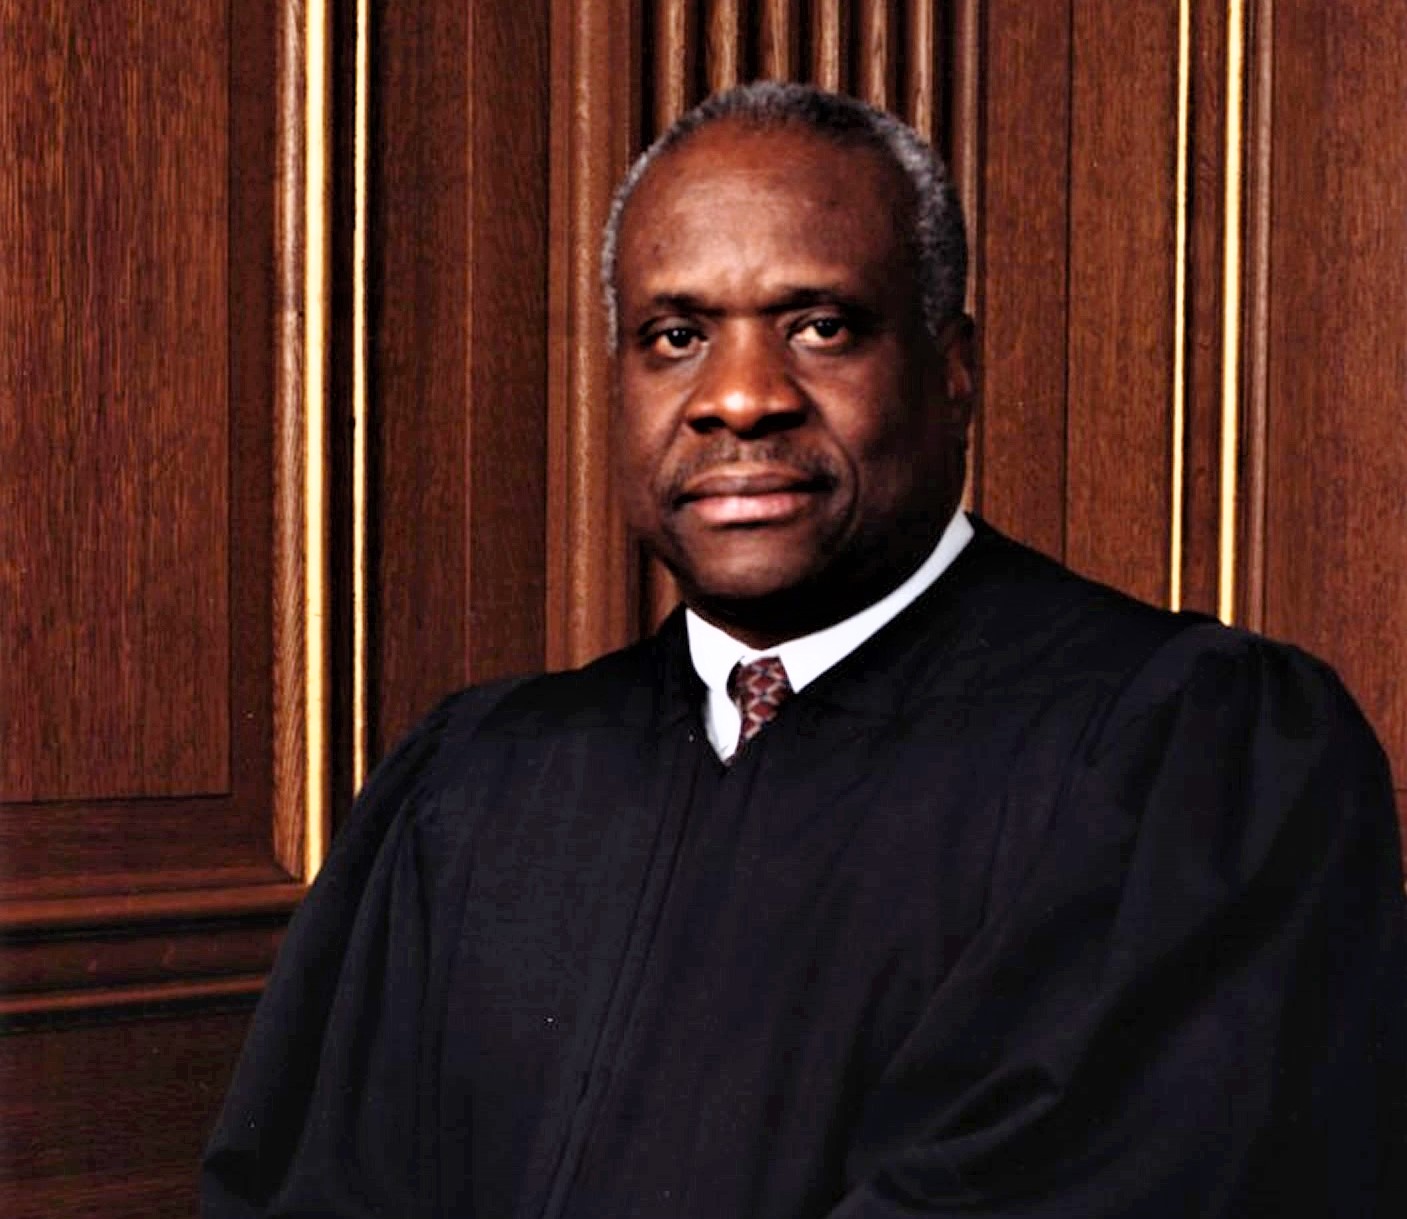 ProPublica report alleges US Supreme Court Justice Thomas failed to report gifts